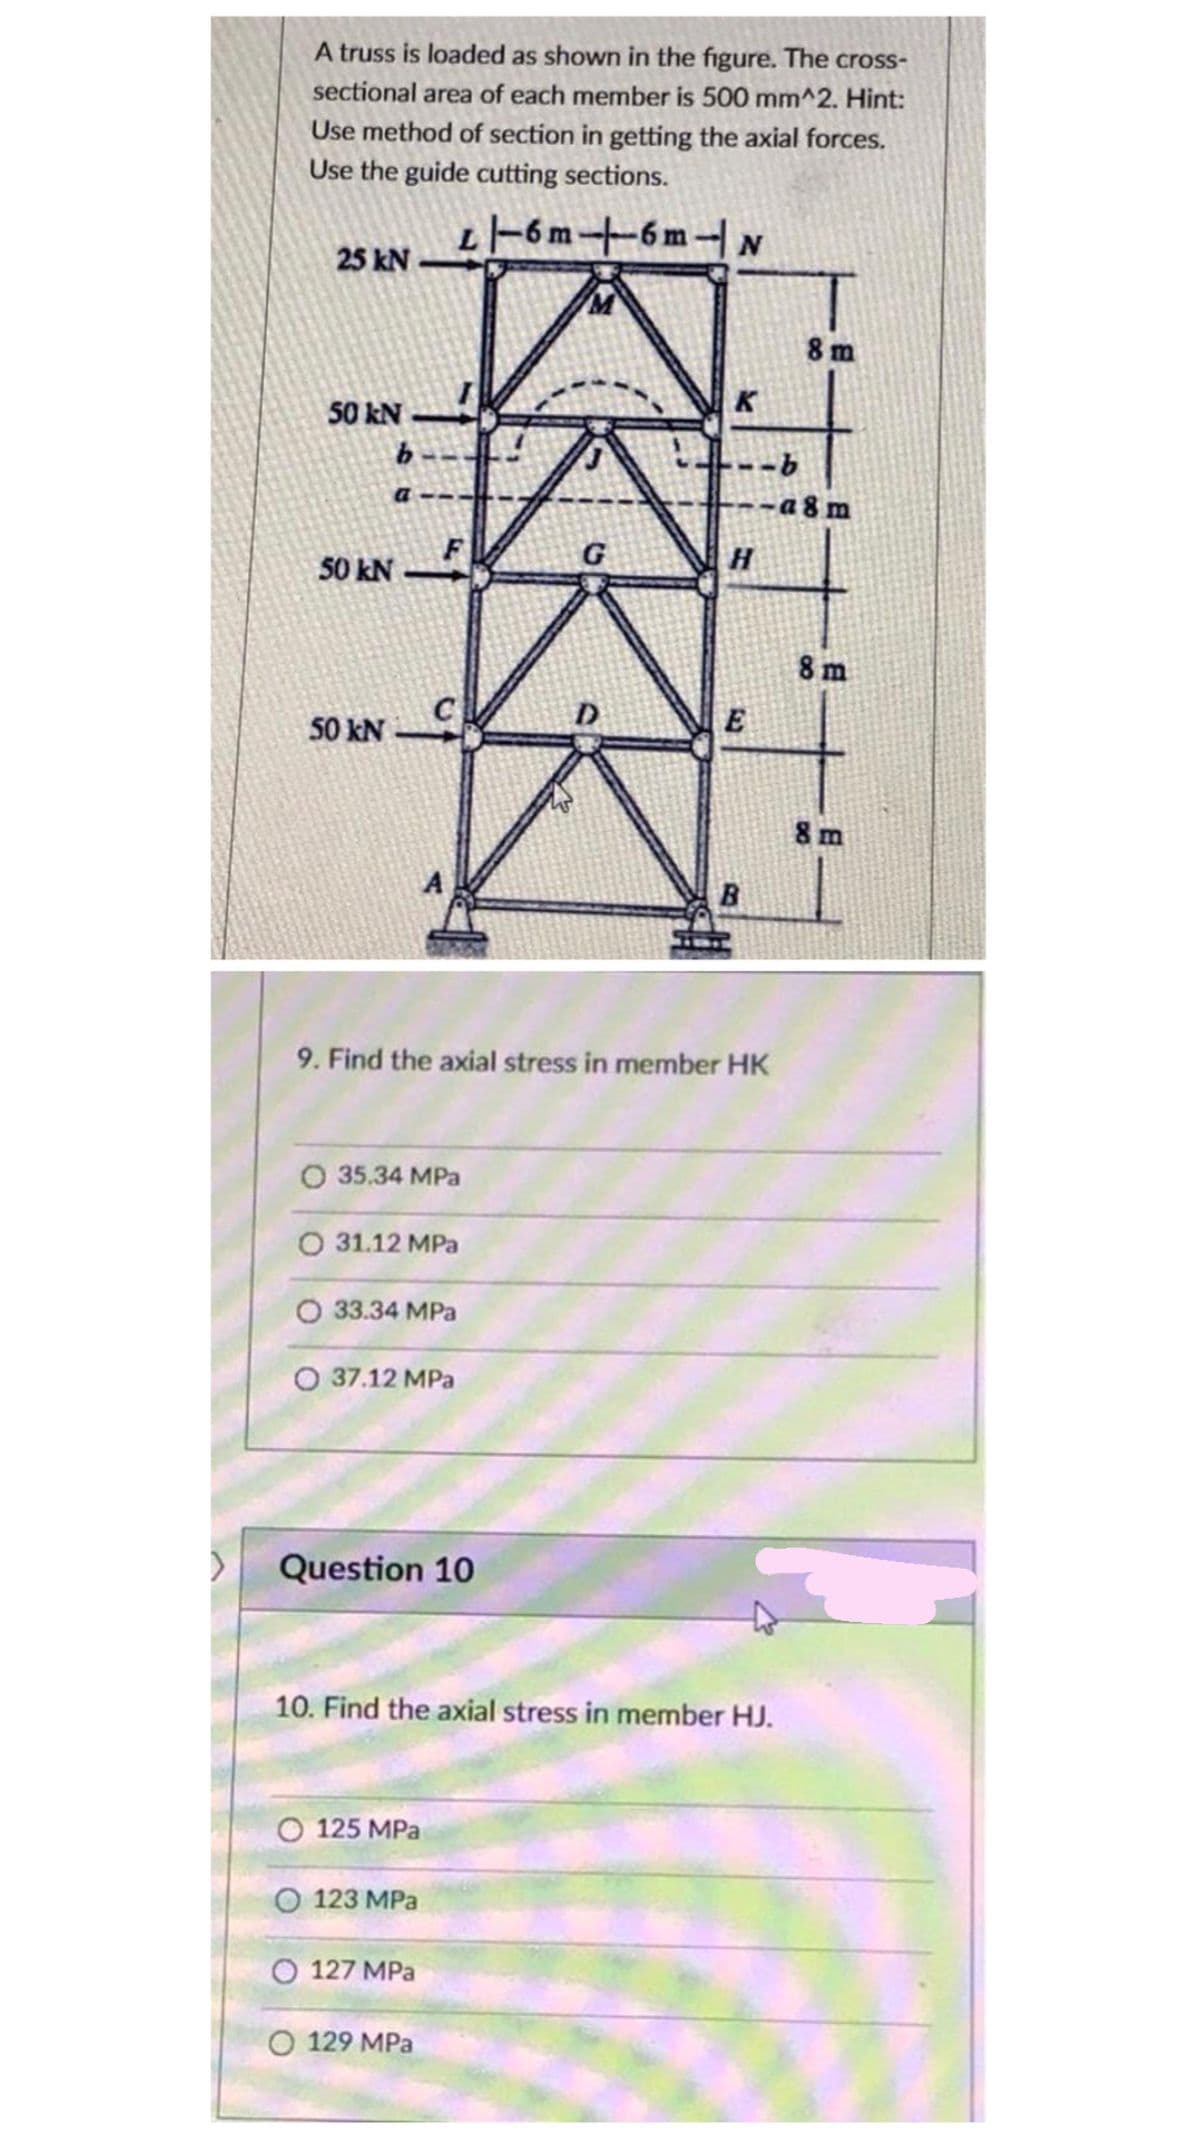 A truss is loaded as shown in the figure. The cross-
sectional area of each member is 500 mm^2. Hint:
Use method of section in getting the axial forces.
Use the guide cutting sections.
L-6 m+6m- N
25 kN
8 m
50 kN -
a 8 m
50 kN
8 m
50 kN
8 m
B.
9. Find the axial stress in member HK
O 35.34 MPa
O 31.12 MPa
O 33.34 MPa
O 37.12 MPa
Question 10
10. Find the axial stress in member HJ.
O 125 MPa
О 123 МPа
O 127 MPa
O 129 MPa
